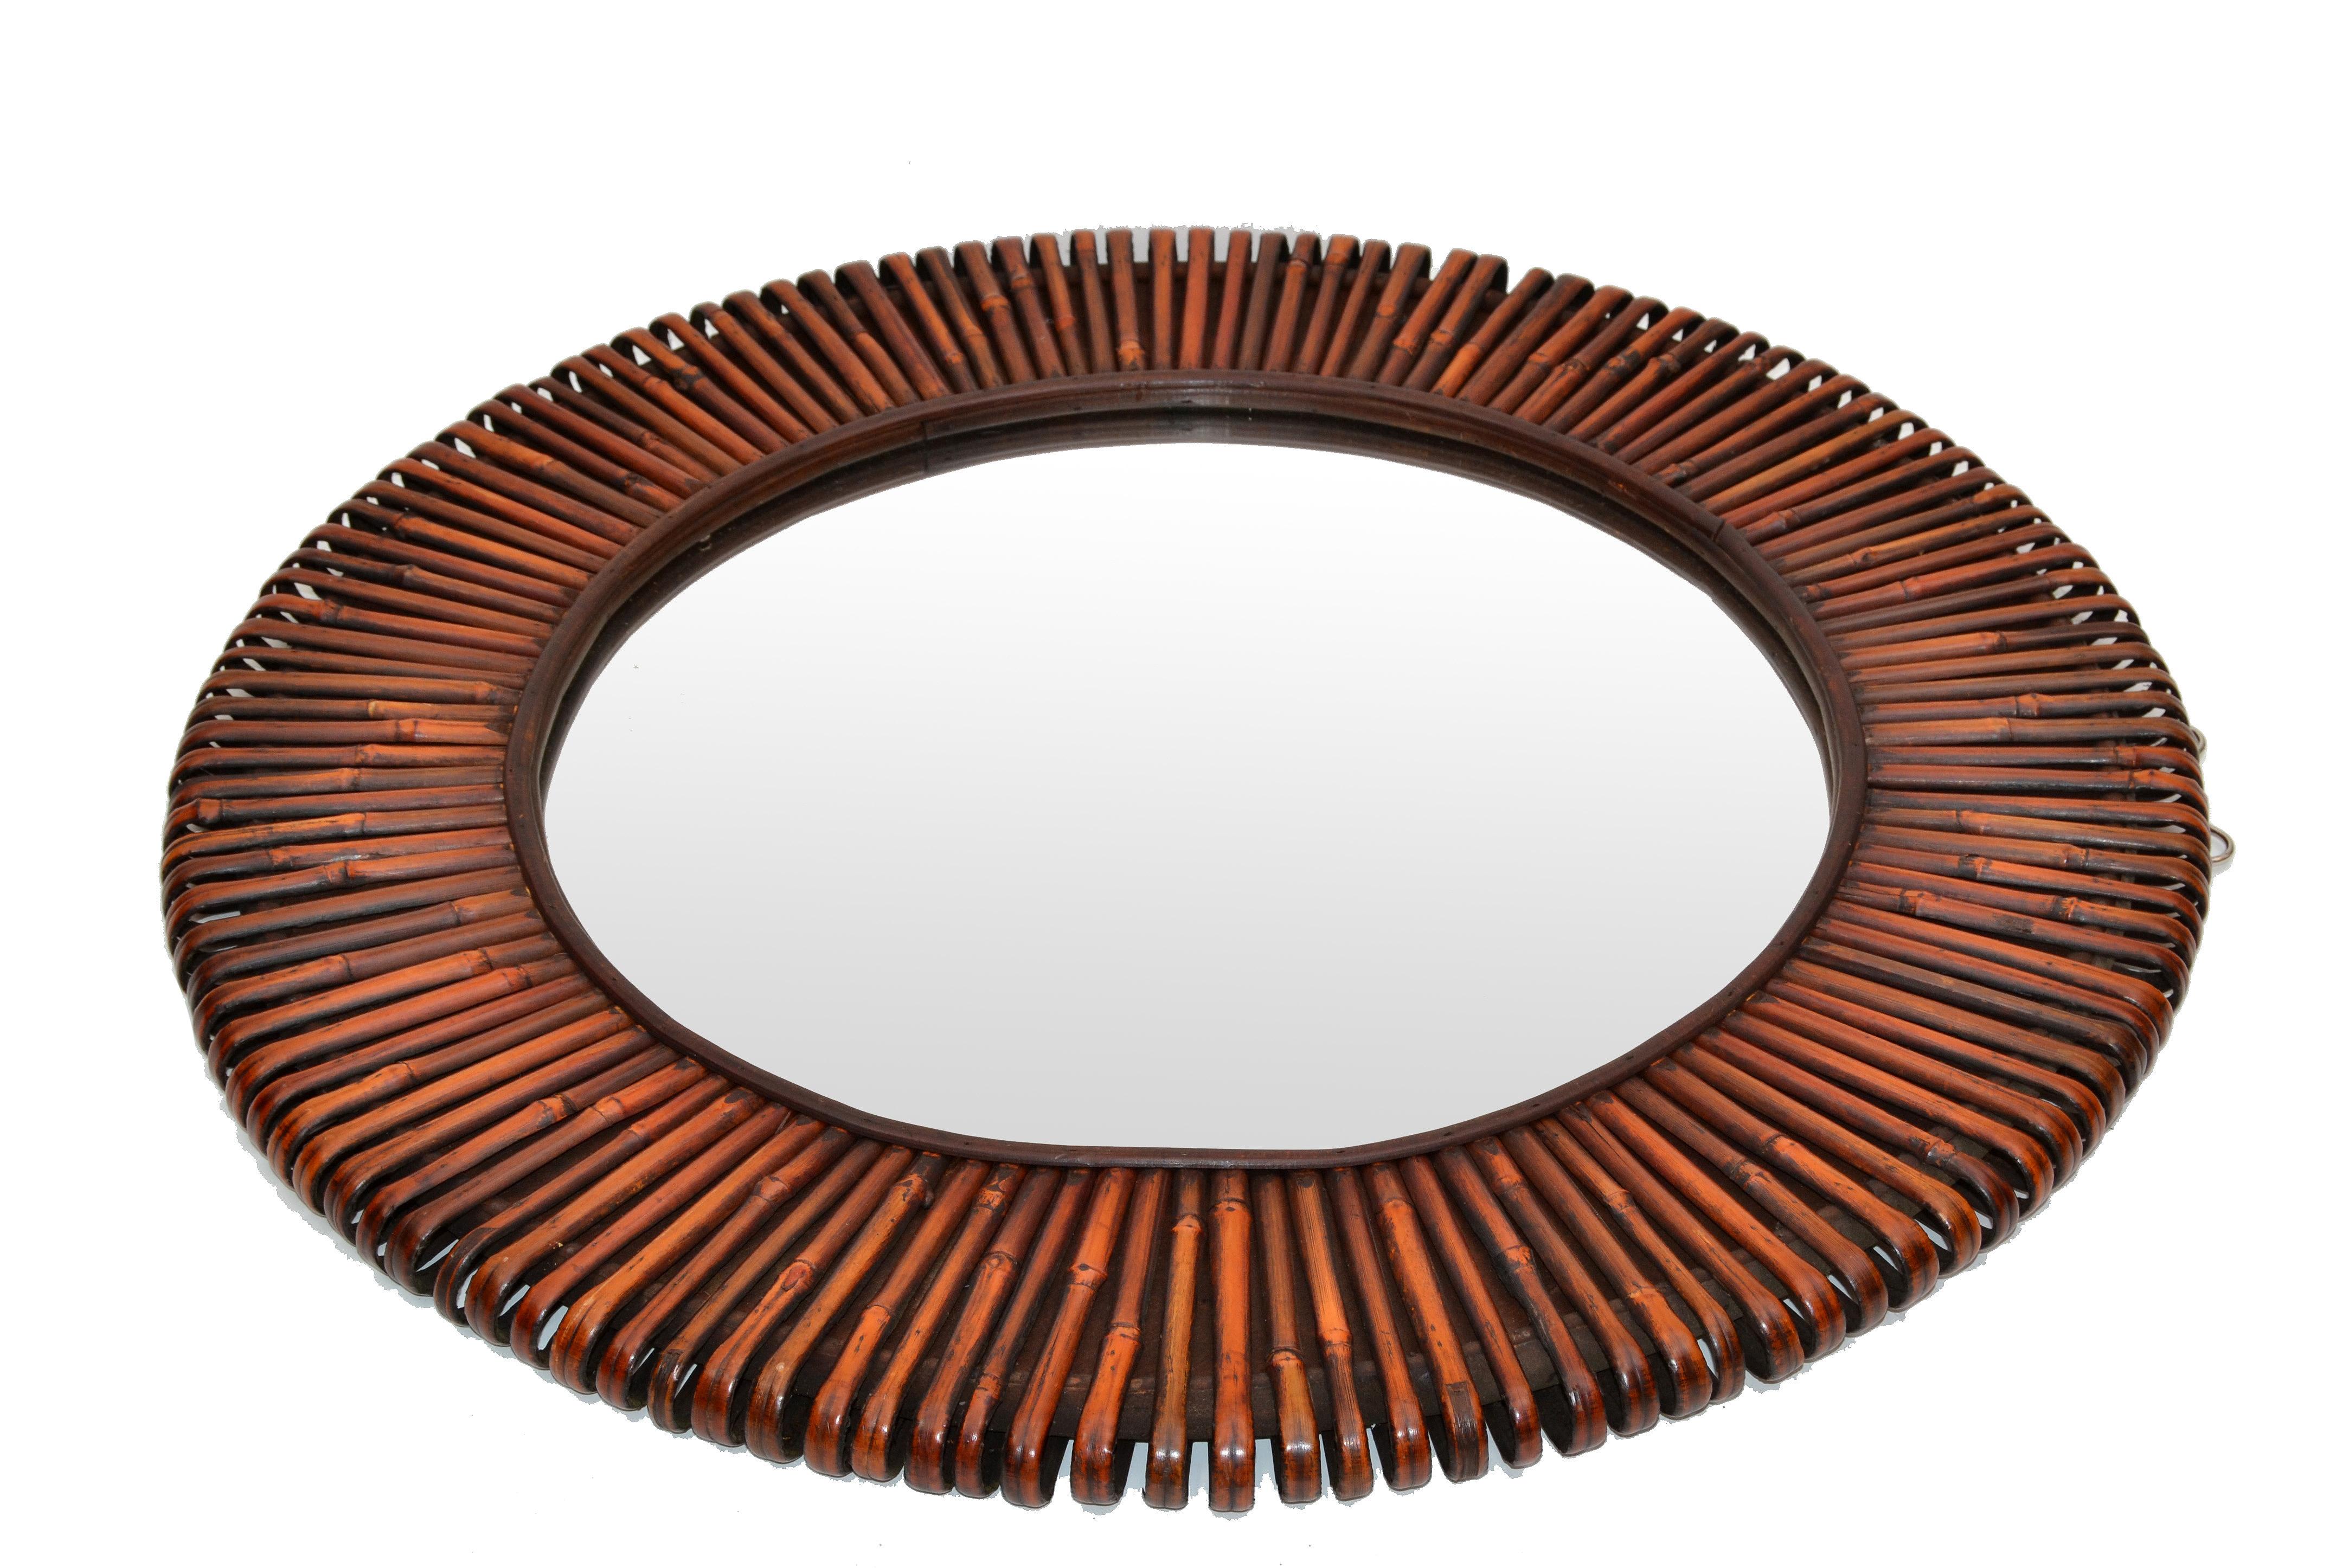 20th Century Contemporary Handcrafted Round Bent Rattan and Wood Mirror